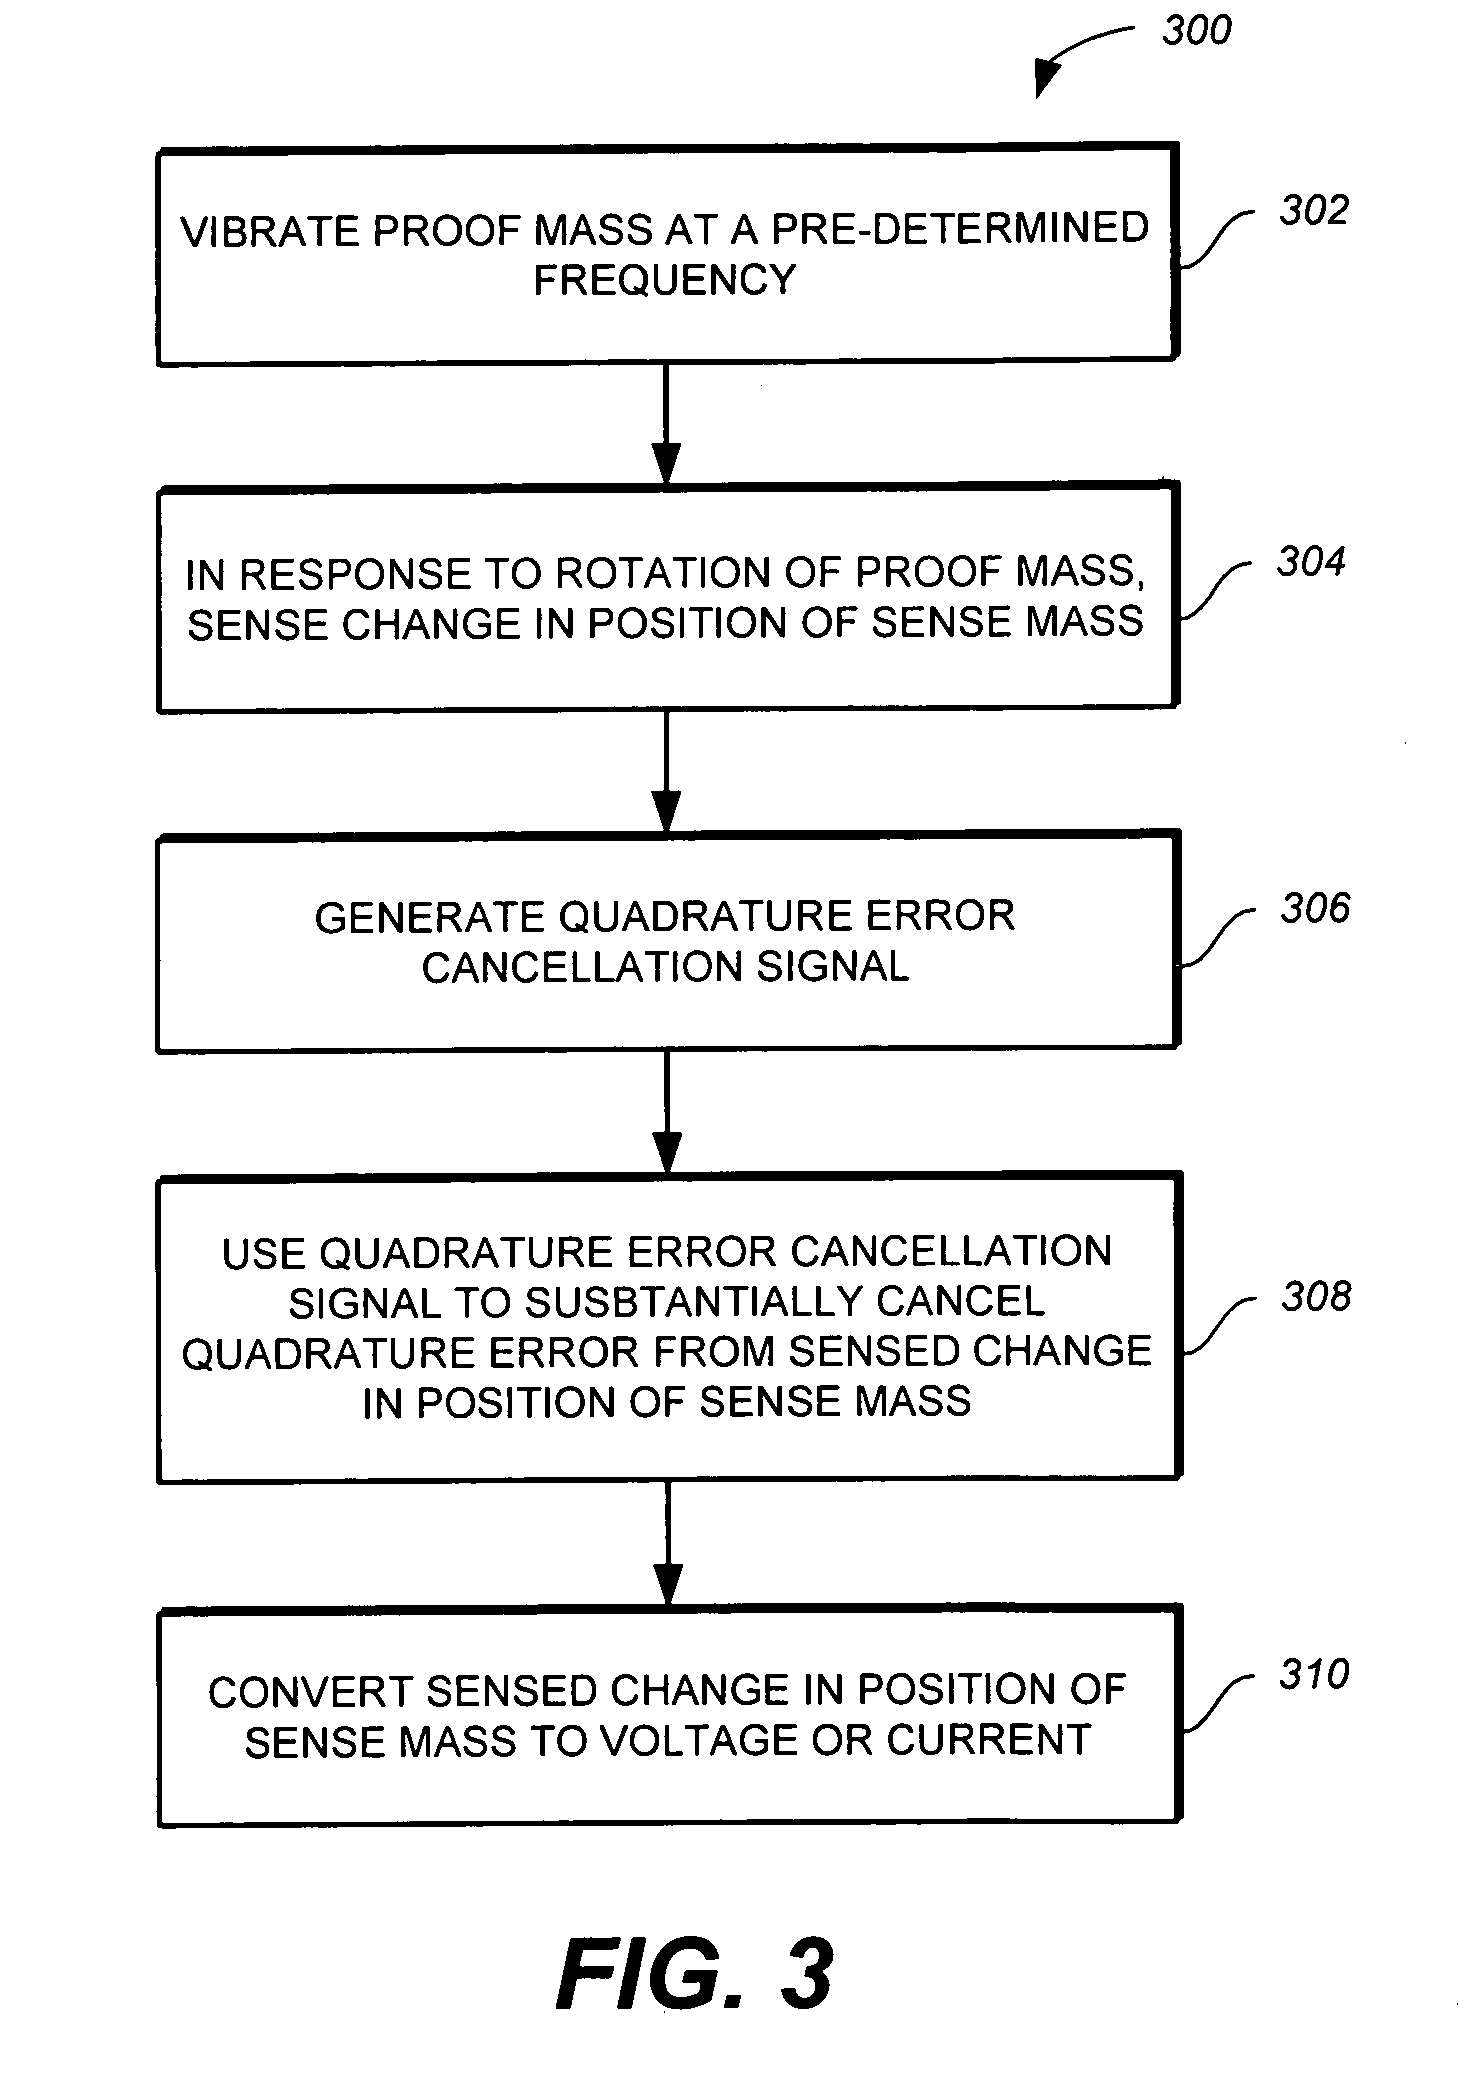 Method and apparatus for electronic cancellation of quadrature error